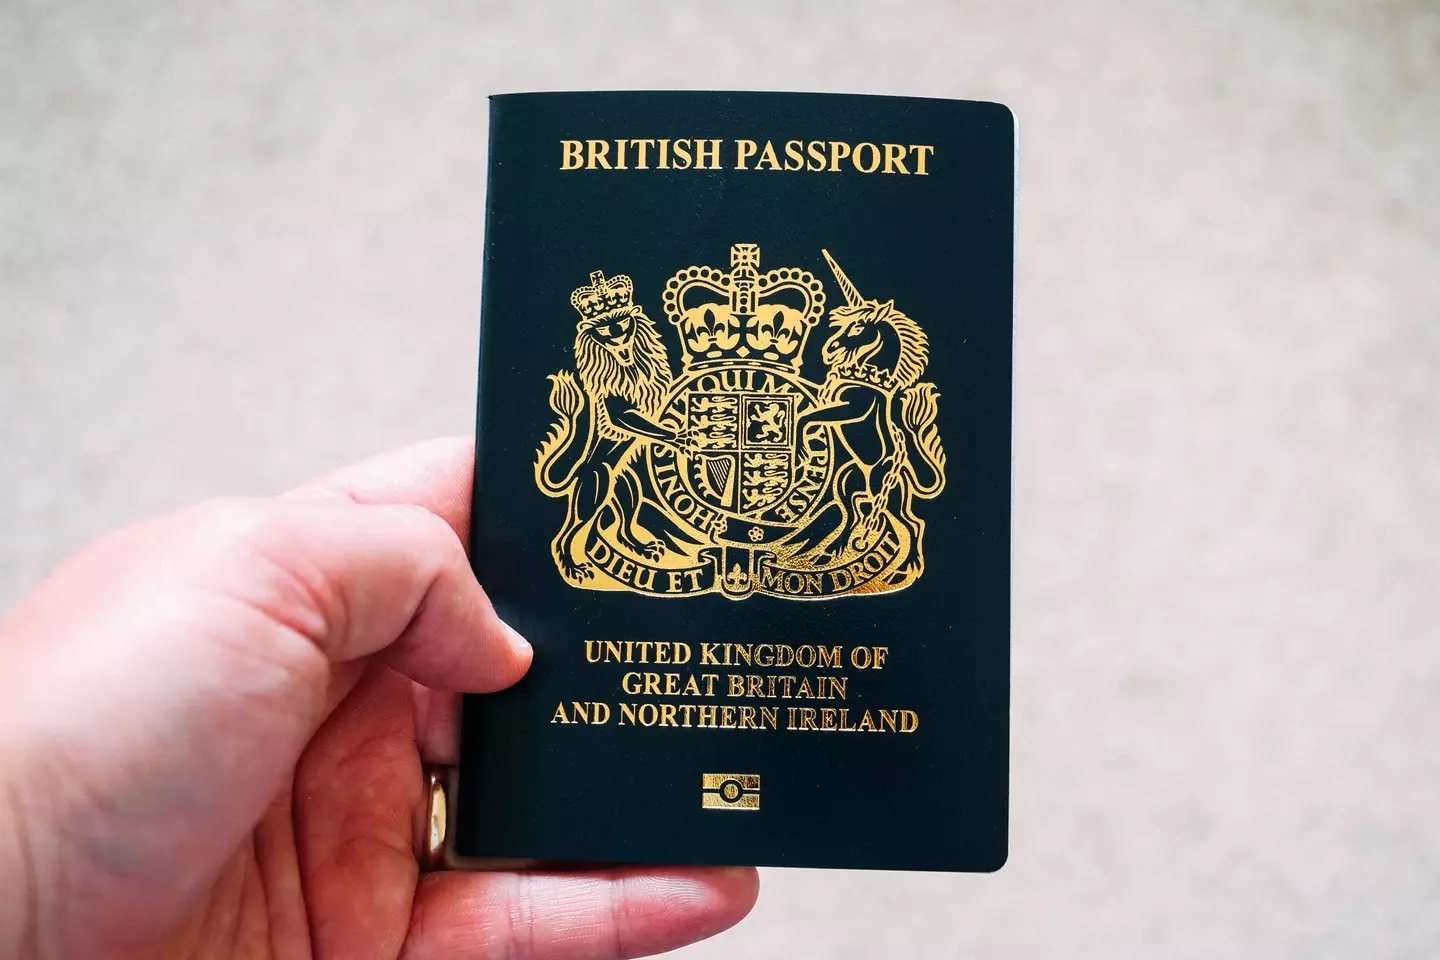 Soon Brits will have to pay a 'visa' fee to enter 30 countries.